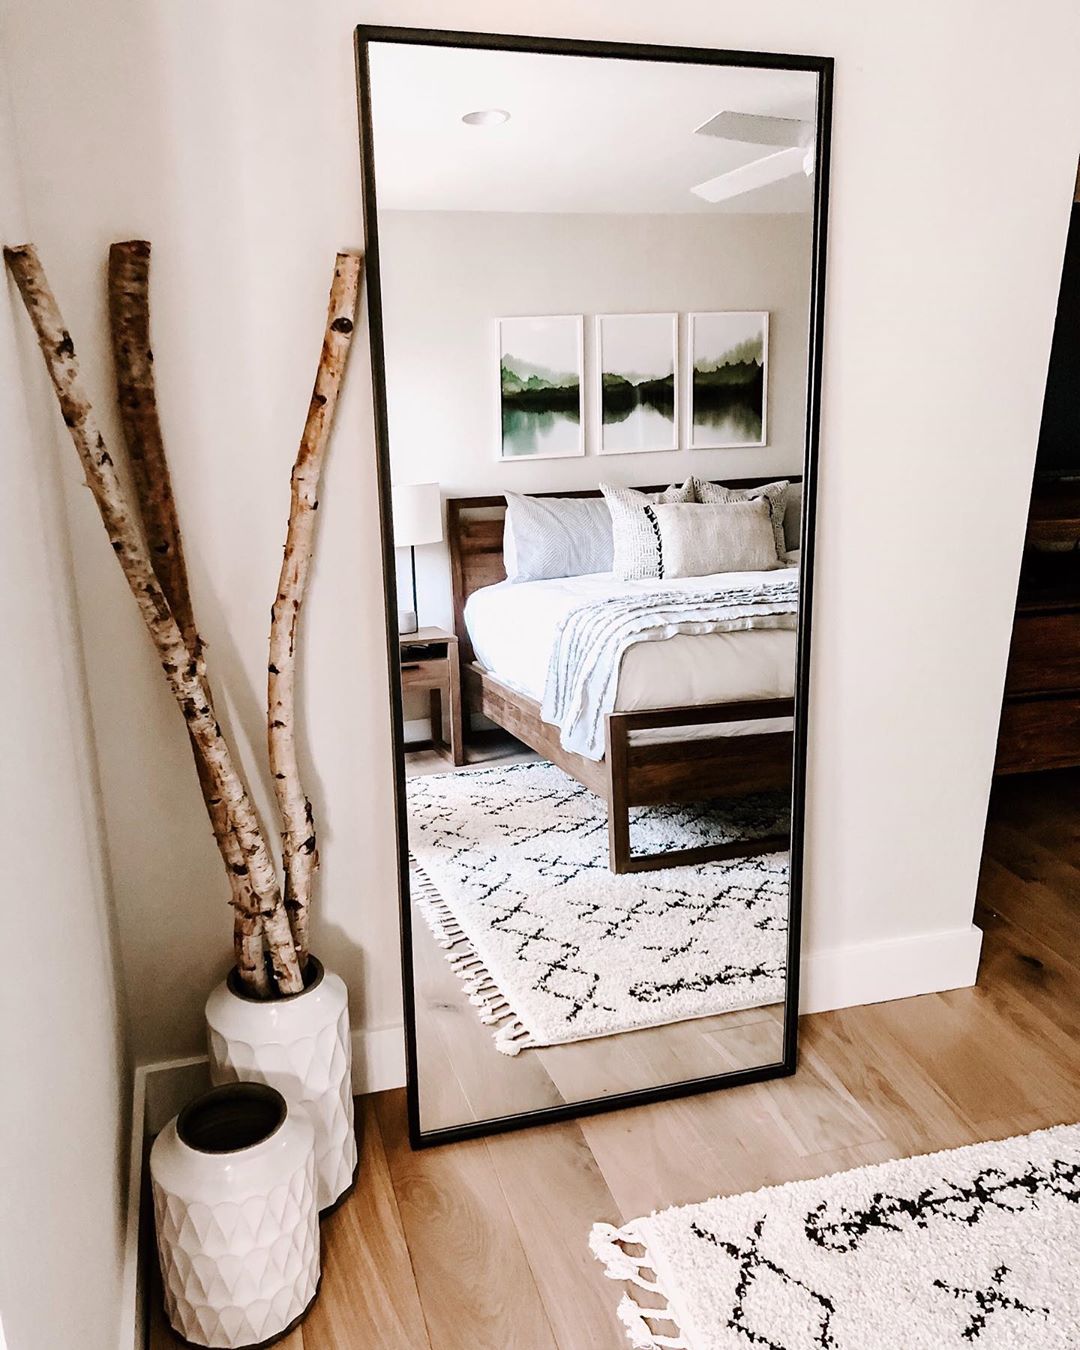 https://www.extraspace.com/blog/wp-content/uploads/2017/02/use-mirrors-small-space-living.jpg